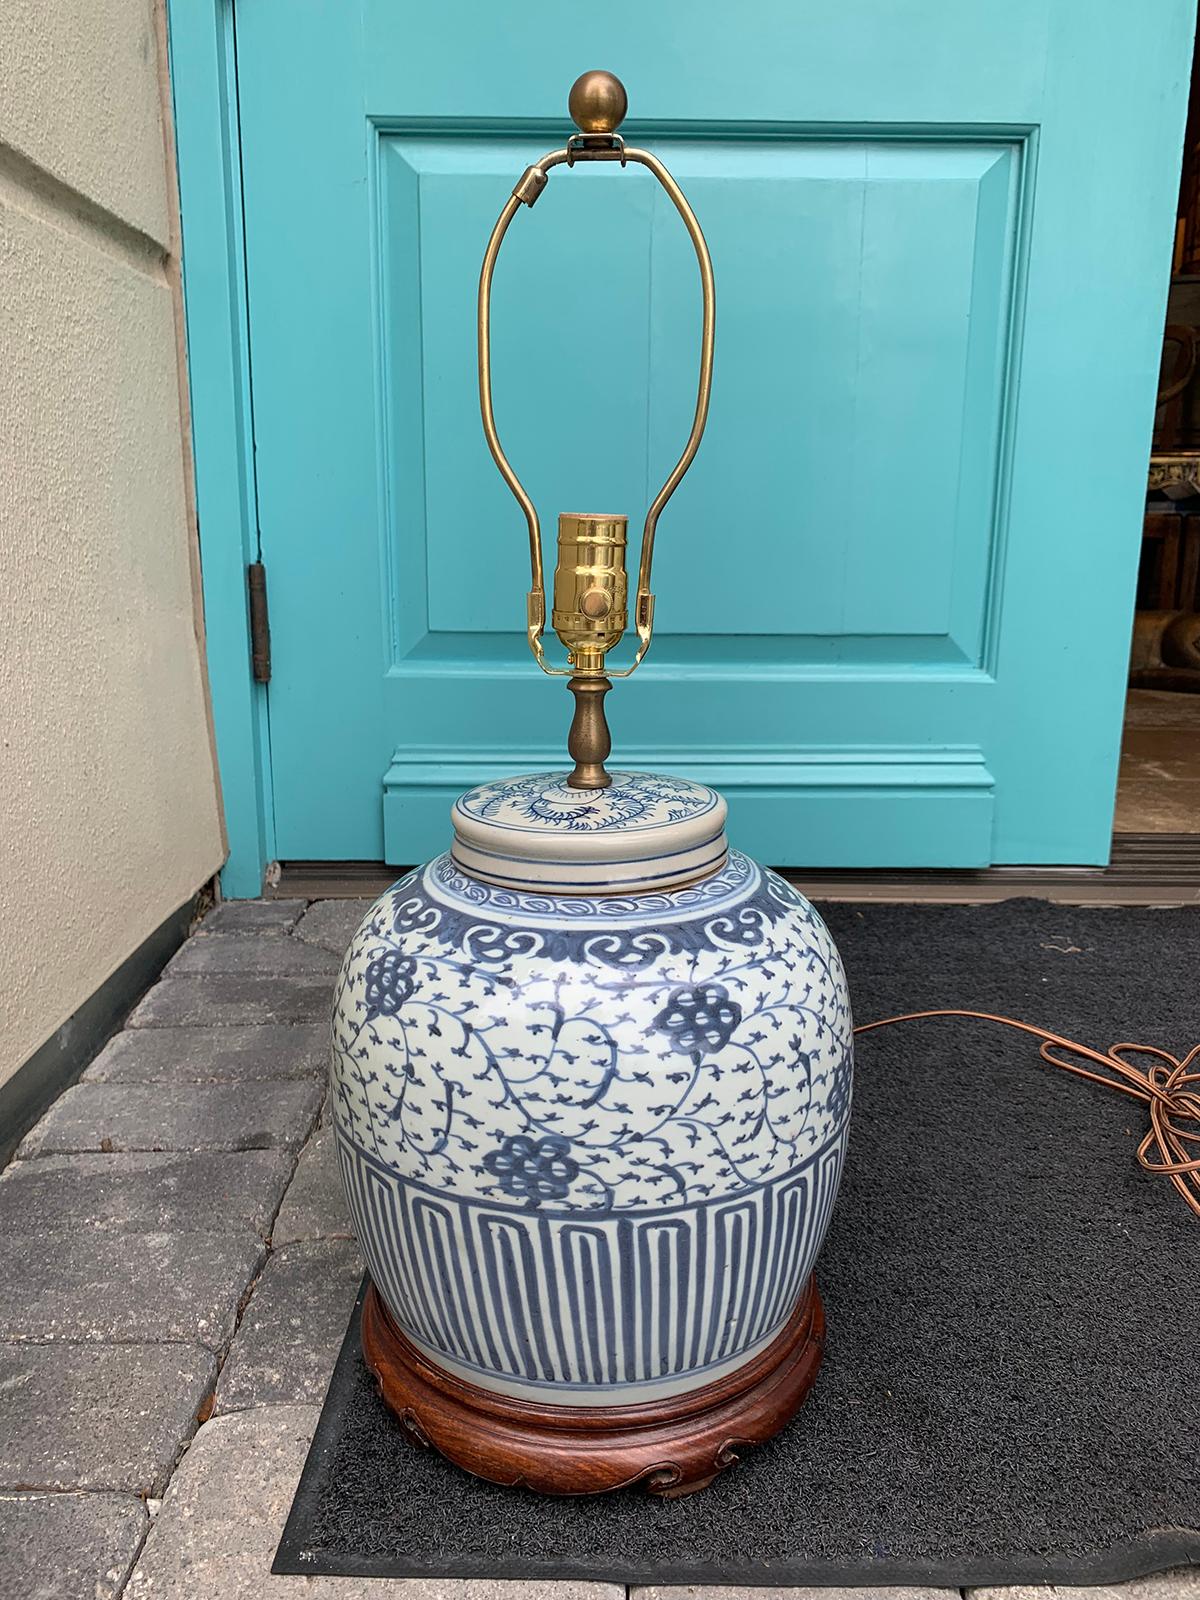 19th-20th century Chinese blue and white covered porcelain jar as lamp
New wiring.